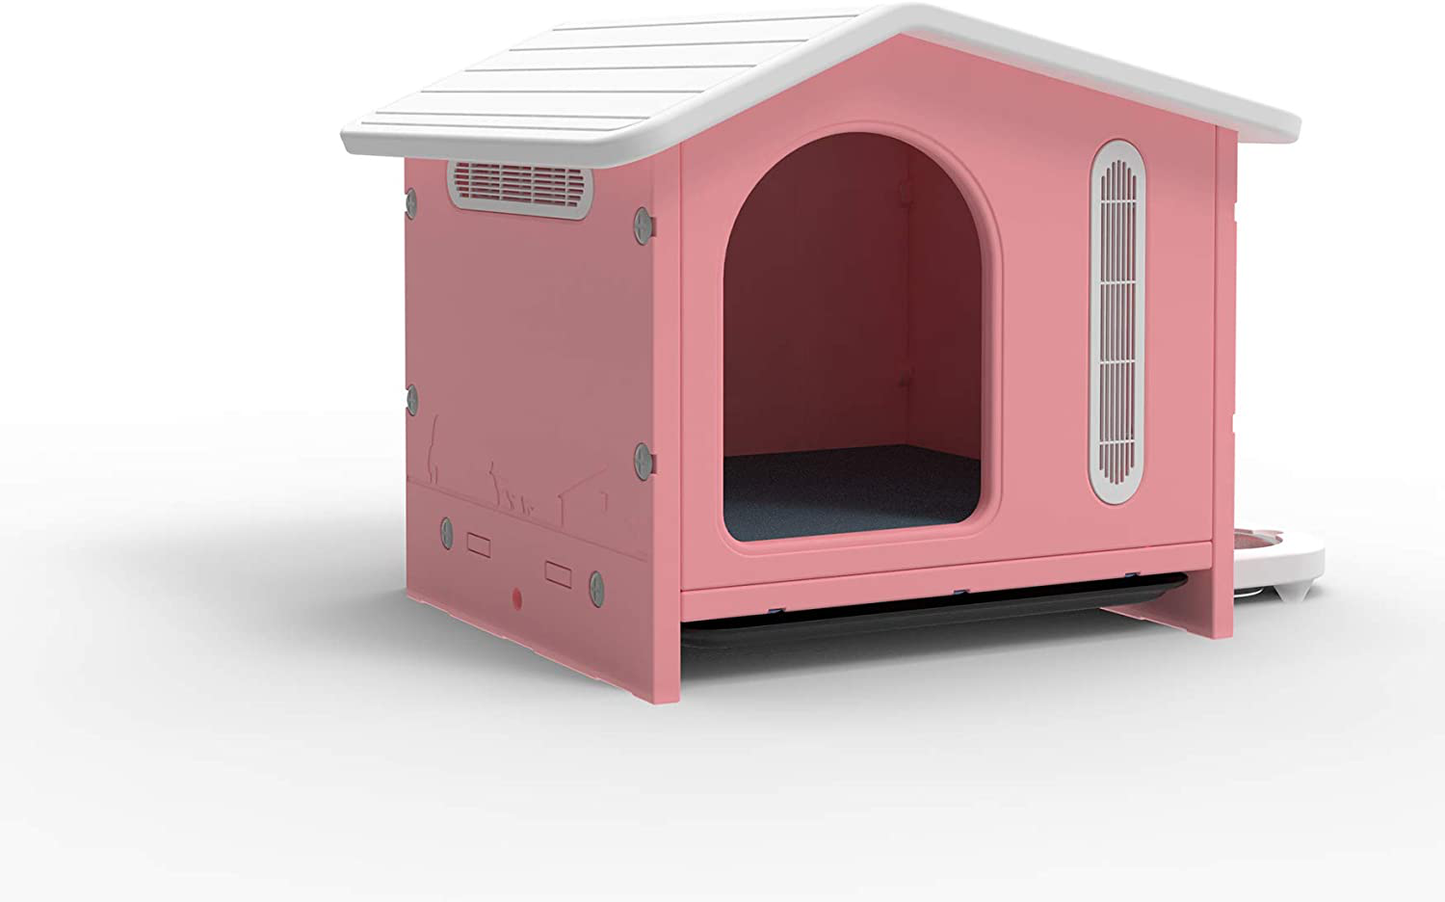 VATO Dog Kennel, Waterproof Plastic Doghouse for Small Pets, Durable Puppy House with Two Food Bowls, 22.8X20.9X22 Inches，Indoor and Outdoor, up to 30 LBS